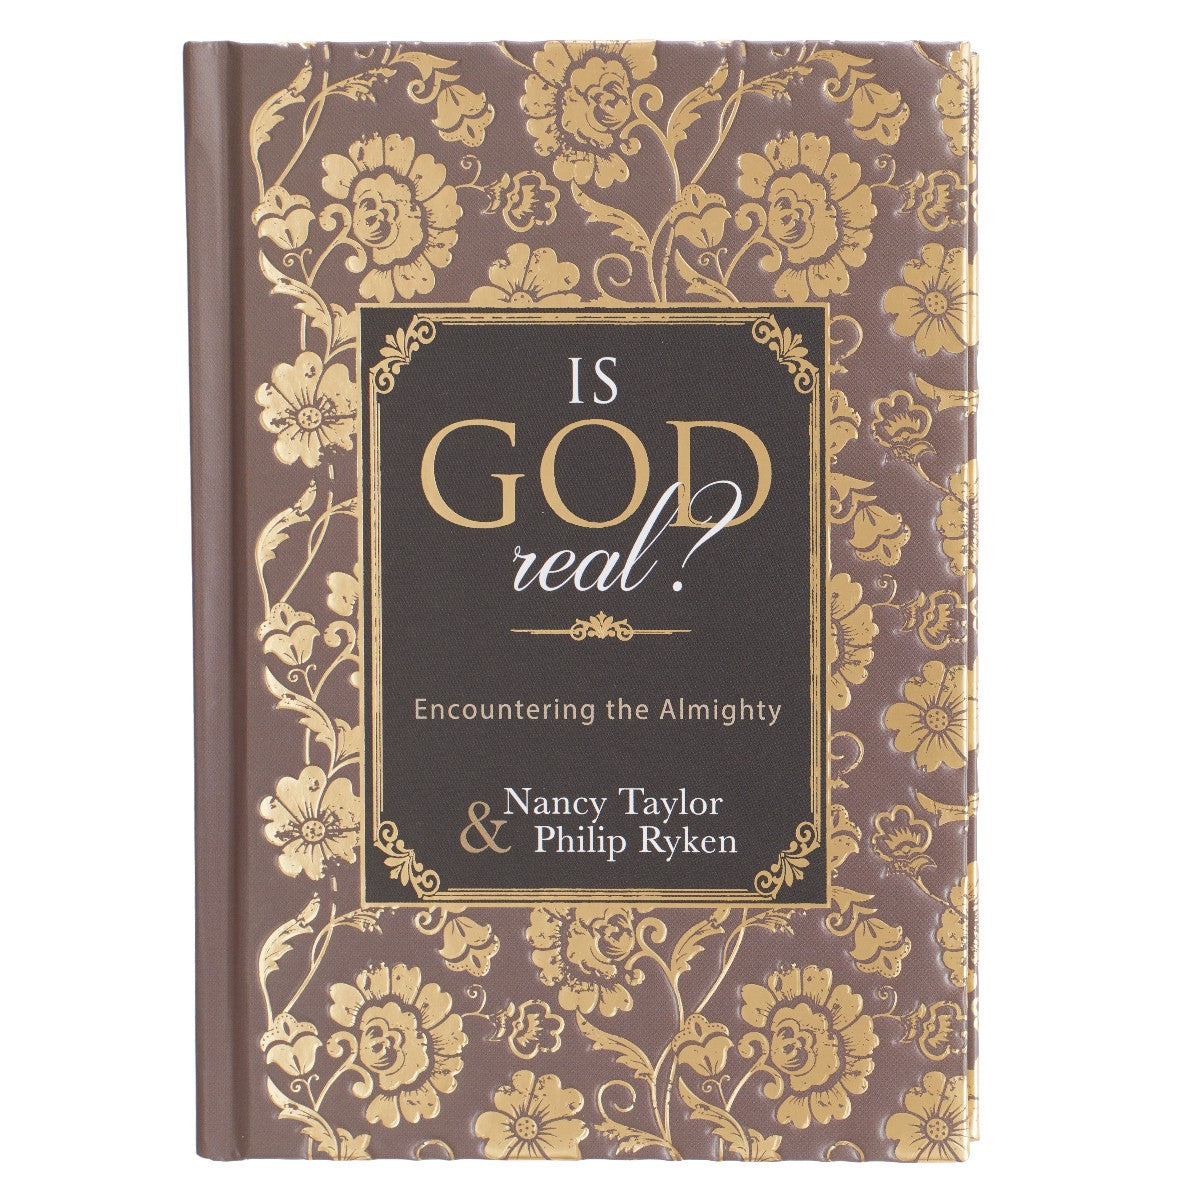 Is God Real? BY NANCY TAYLOR & PHILIP RYKEN